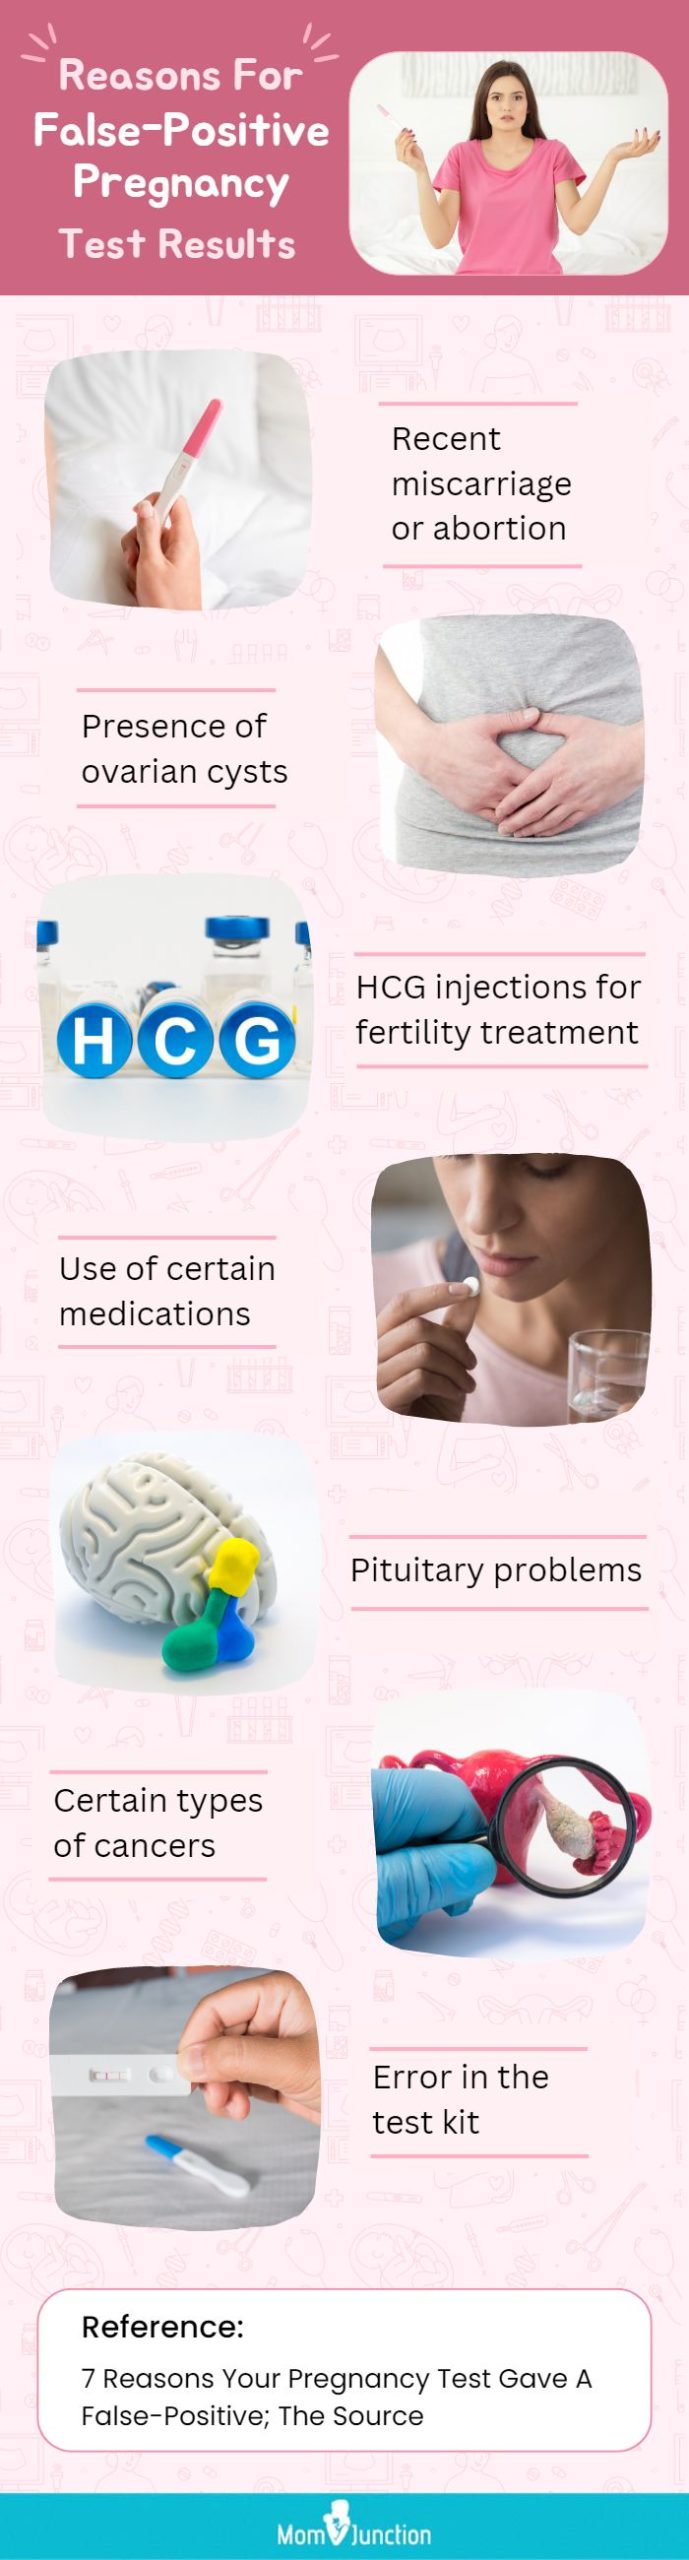 reasons for false positive pregnancy test results (infographic)